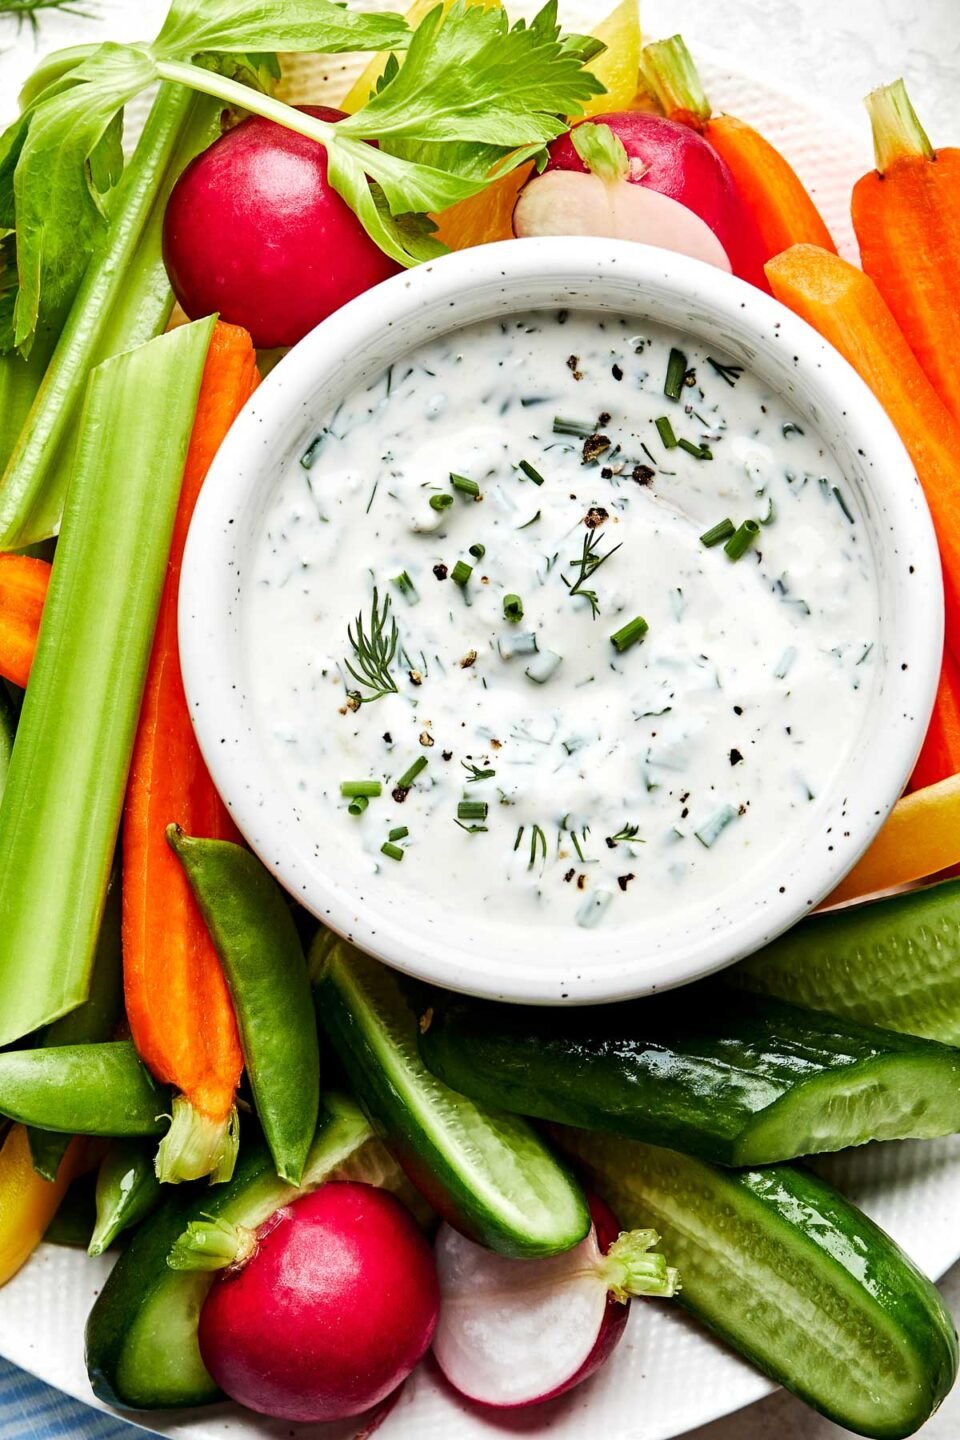 An overhead shot of a small white bowl of ranch dip garnished with fresh chives and dill alongside sliced carrots, celery, radishes, snap peas and cucumbers on a white plate.